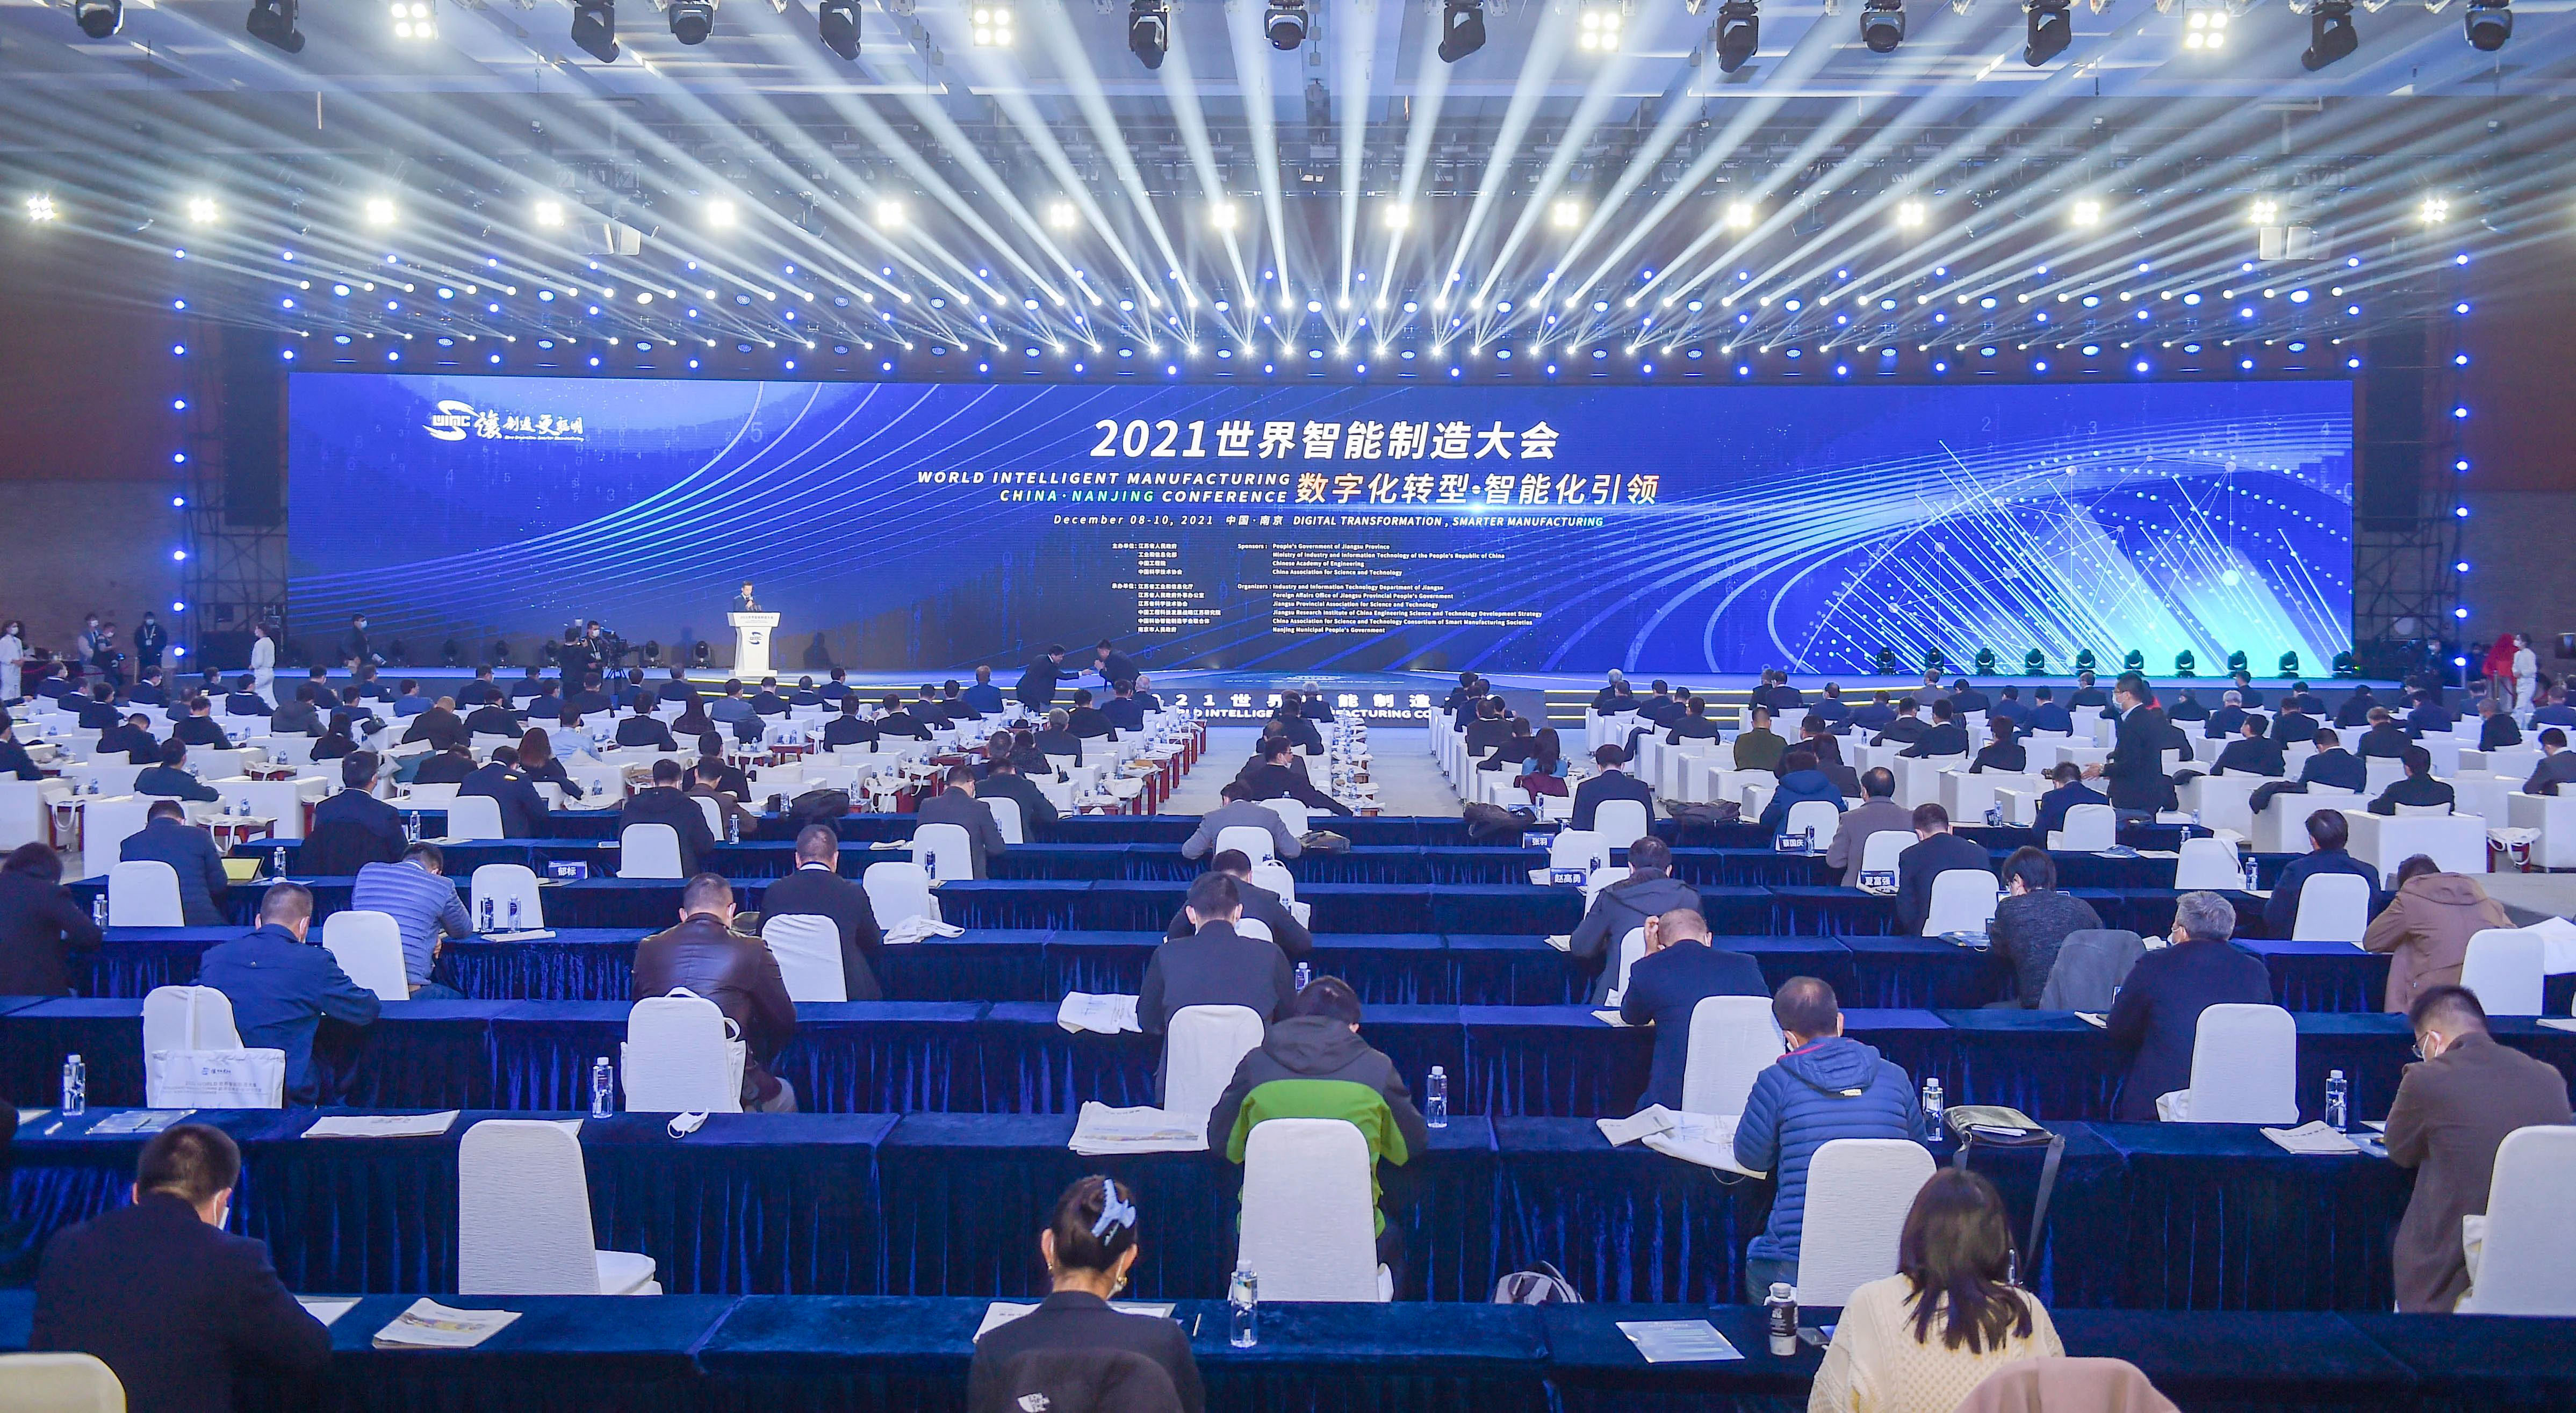 Minivision AI Epidemic Prevention Guard [2021 World Intelligent Manufacturing Conference] Successfully Held